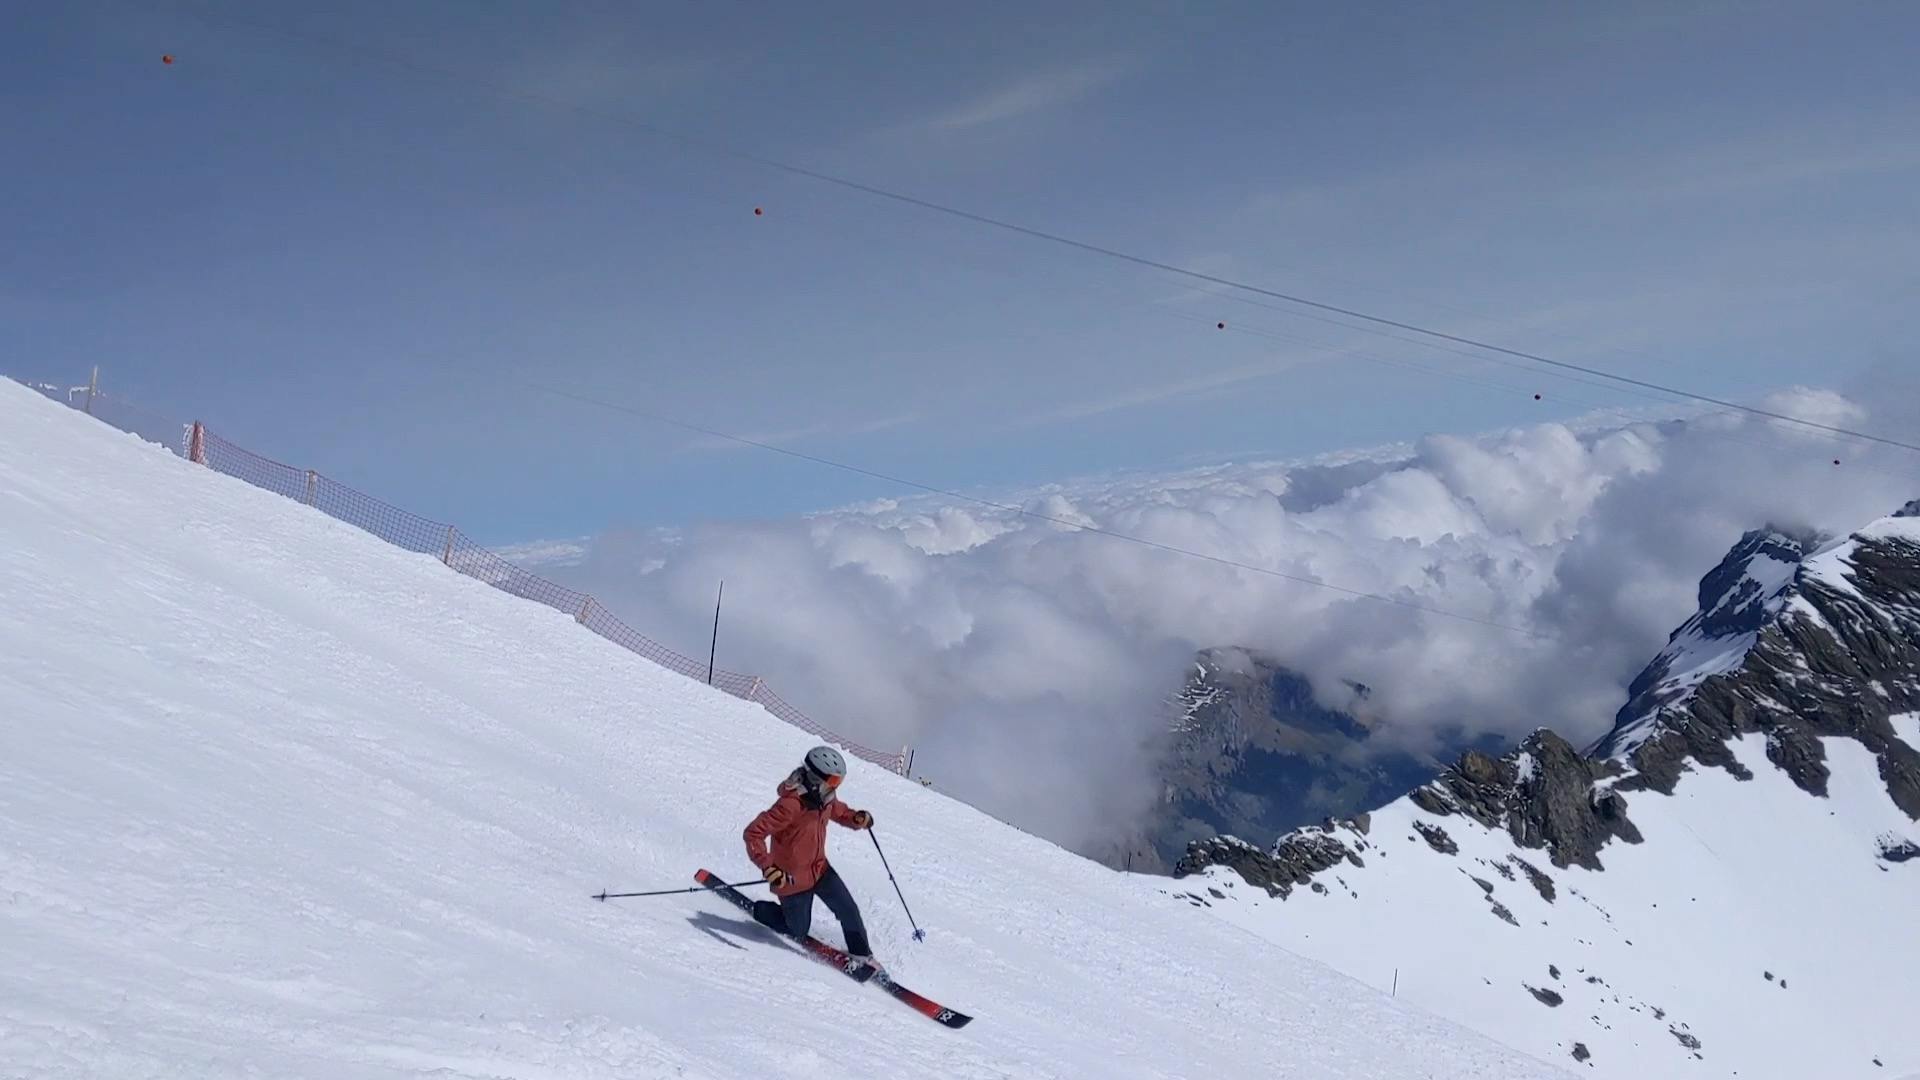 A telemark skier turns down a mountain. There are clouds in the background.